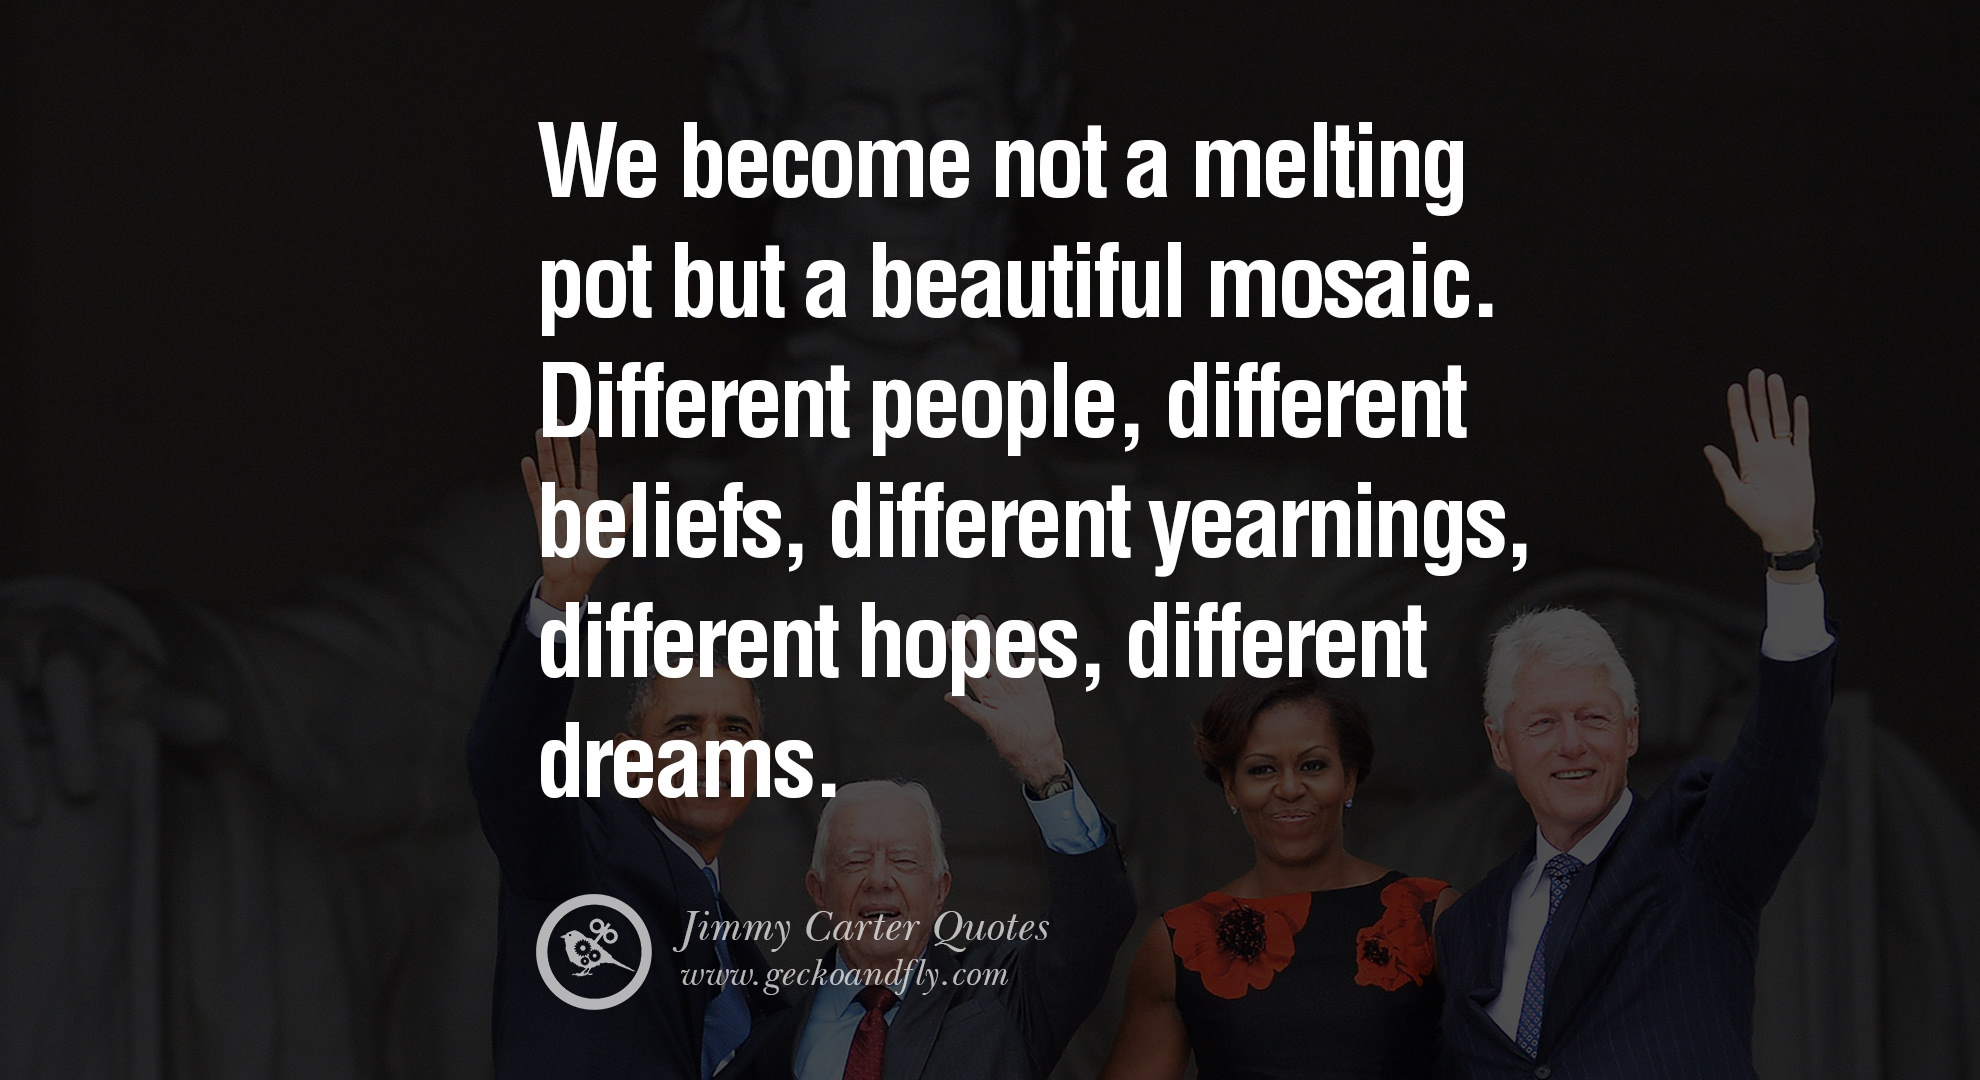 We become not a melting pot but a beautiful mosaic. Different people, different beliefs, different yearnings, different hopes, different dreams. Jimmy Carter